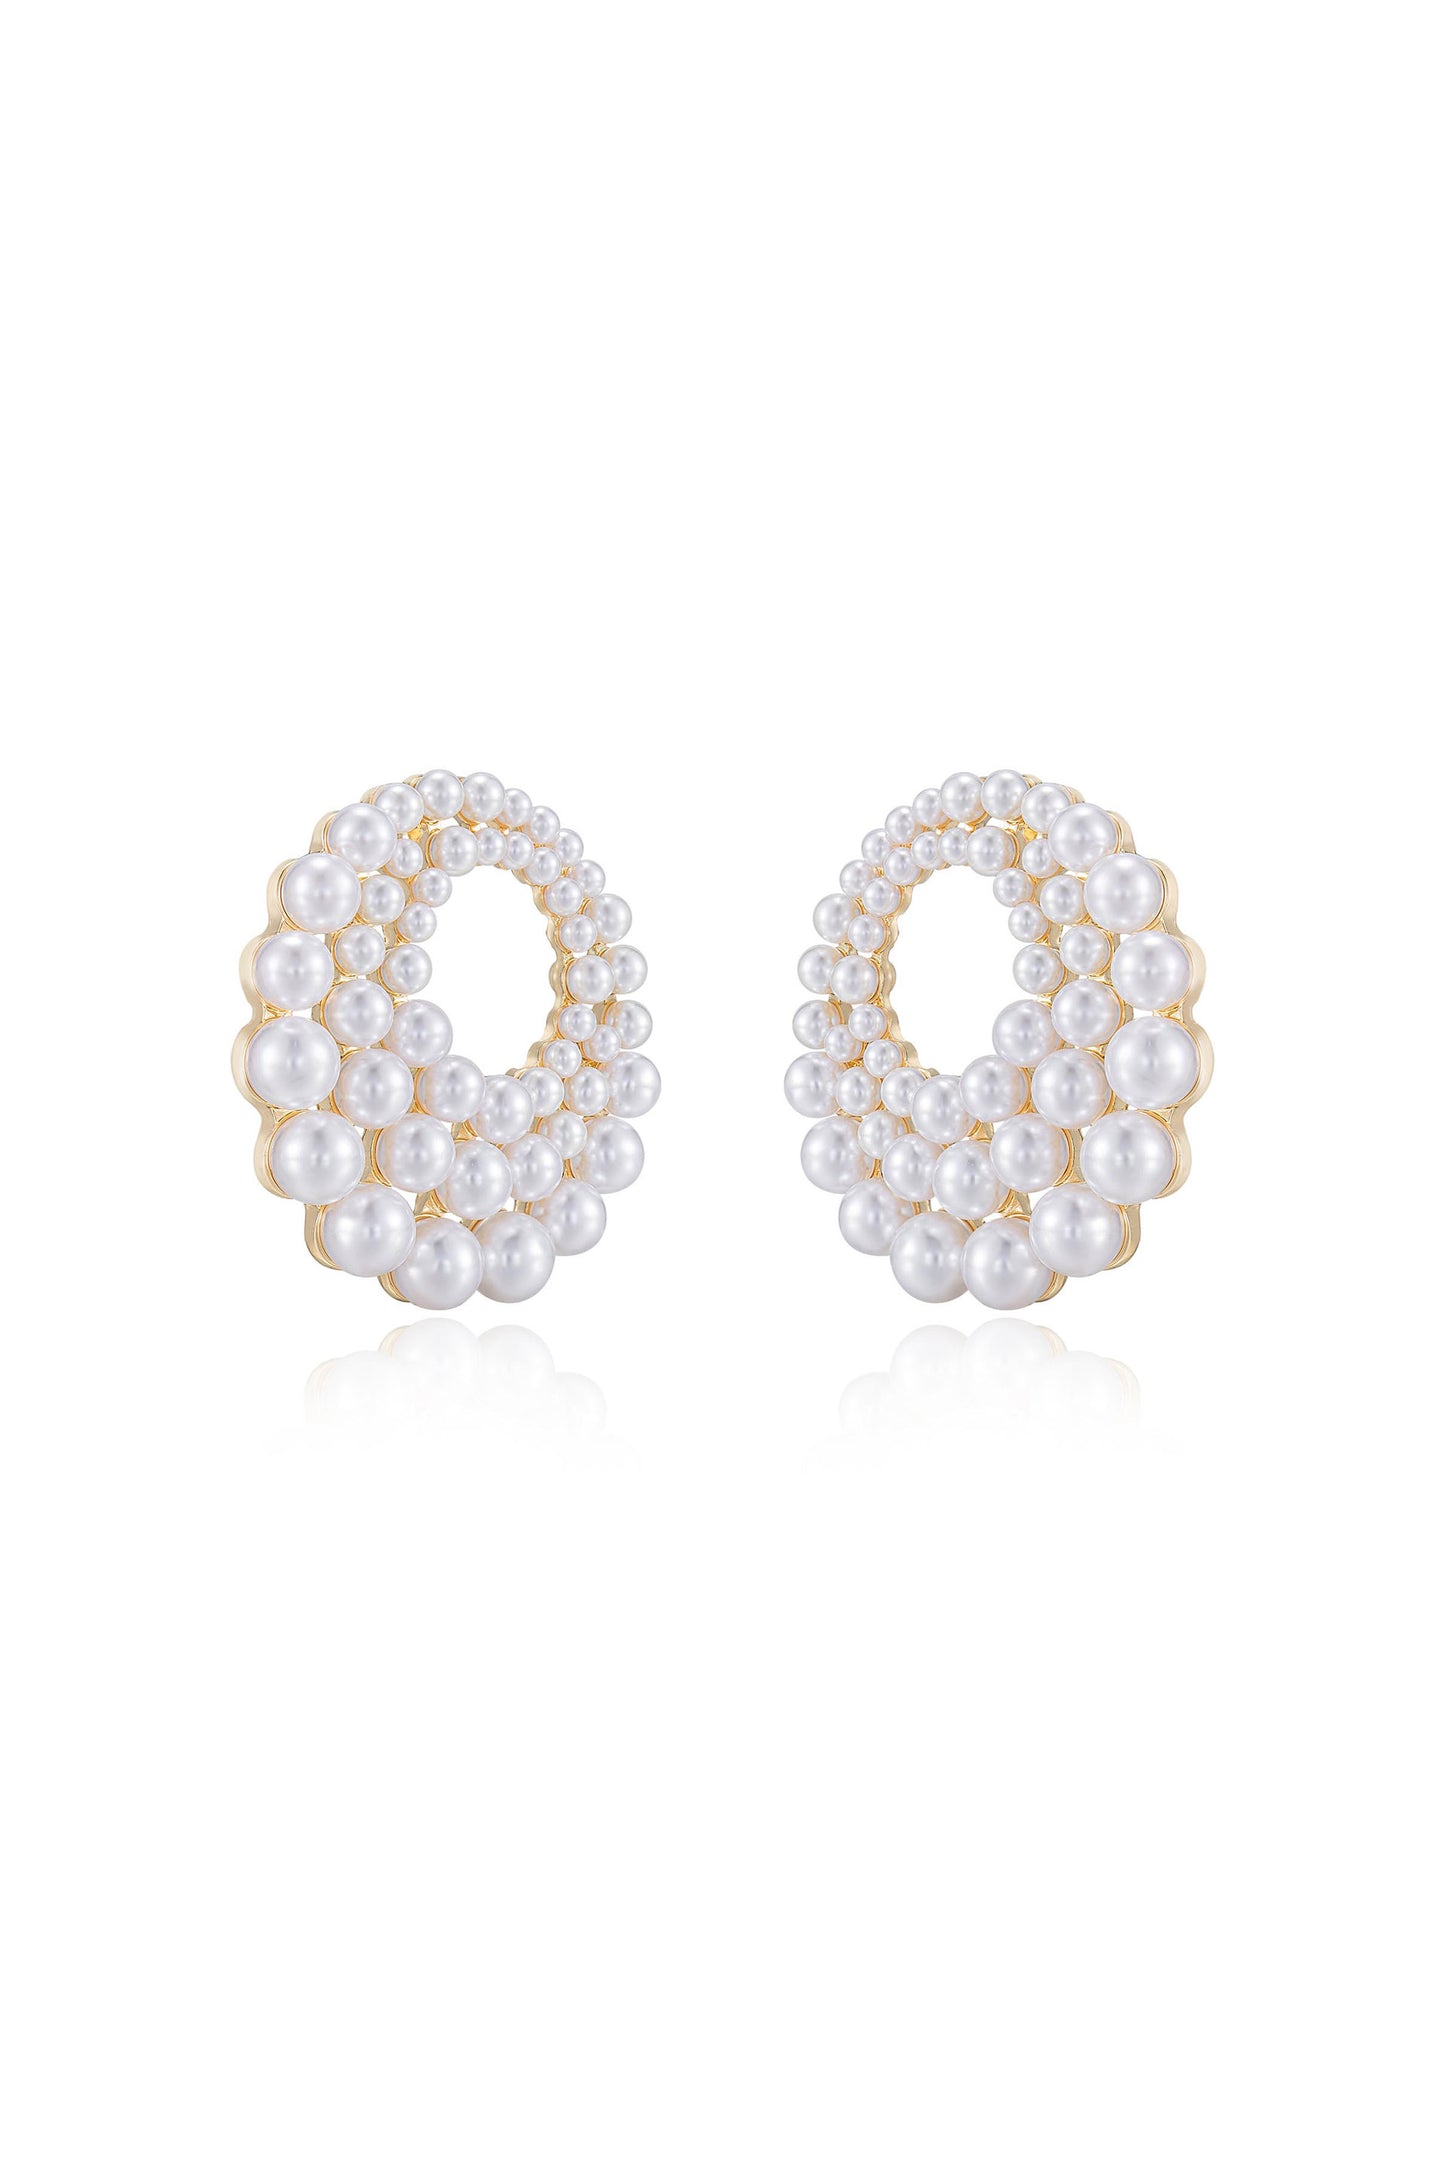 Blushing Pearl 18k Gold Plated Earrings